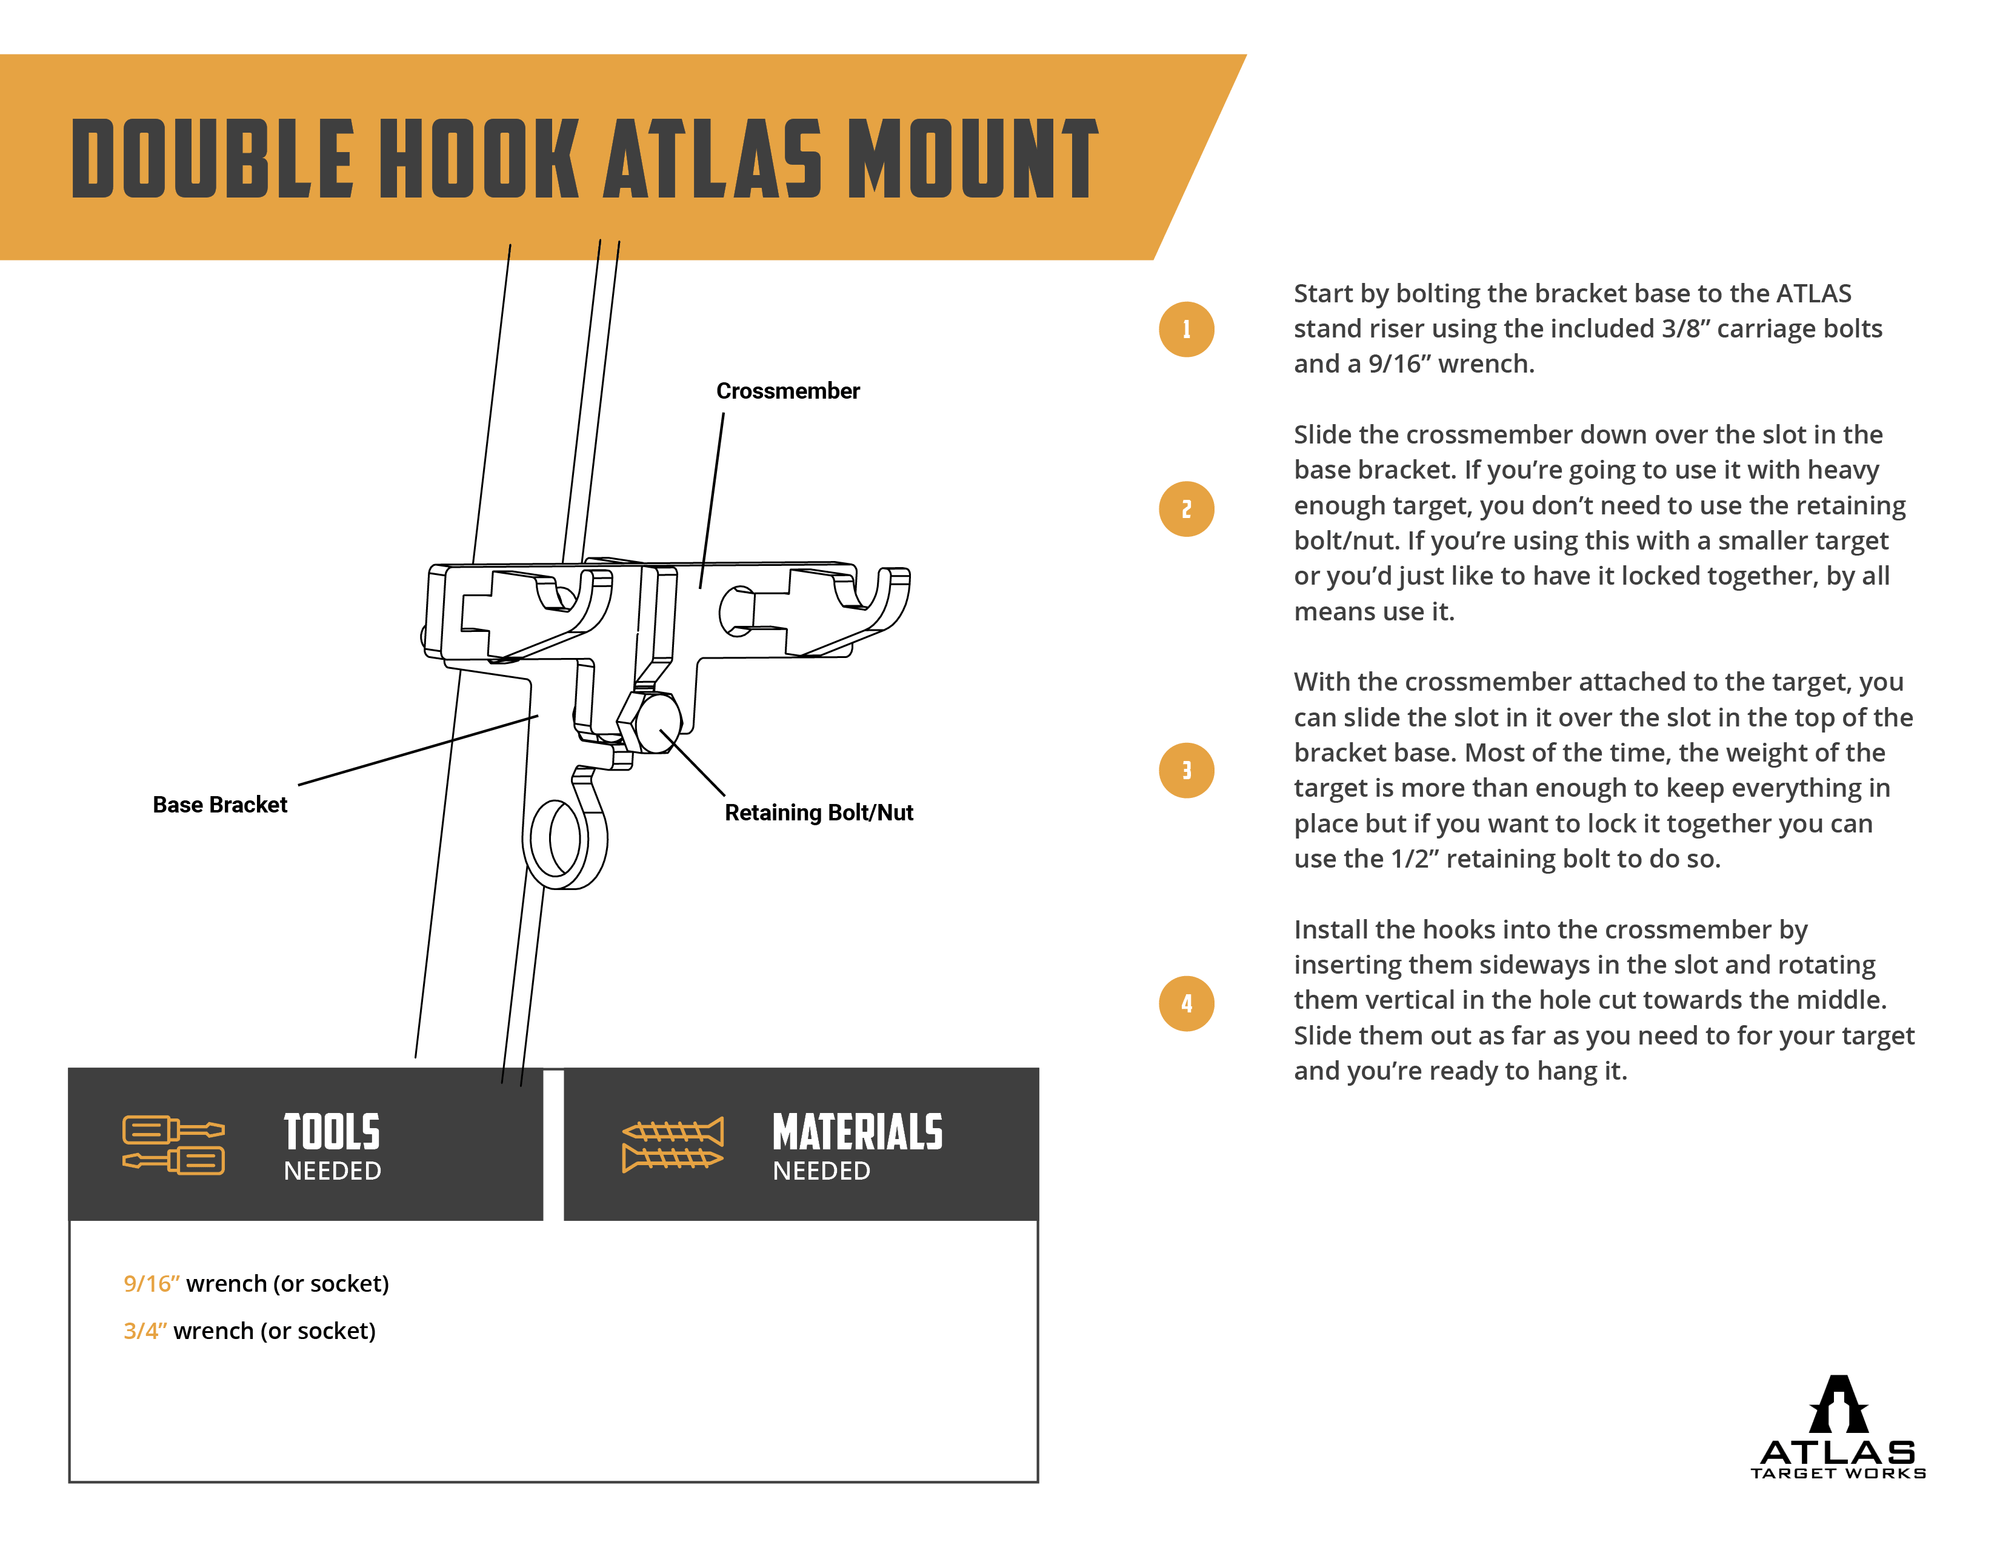 double hook vertical atlas mount assembly instructions